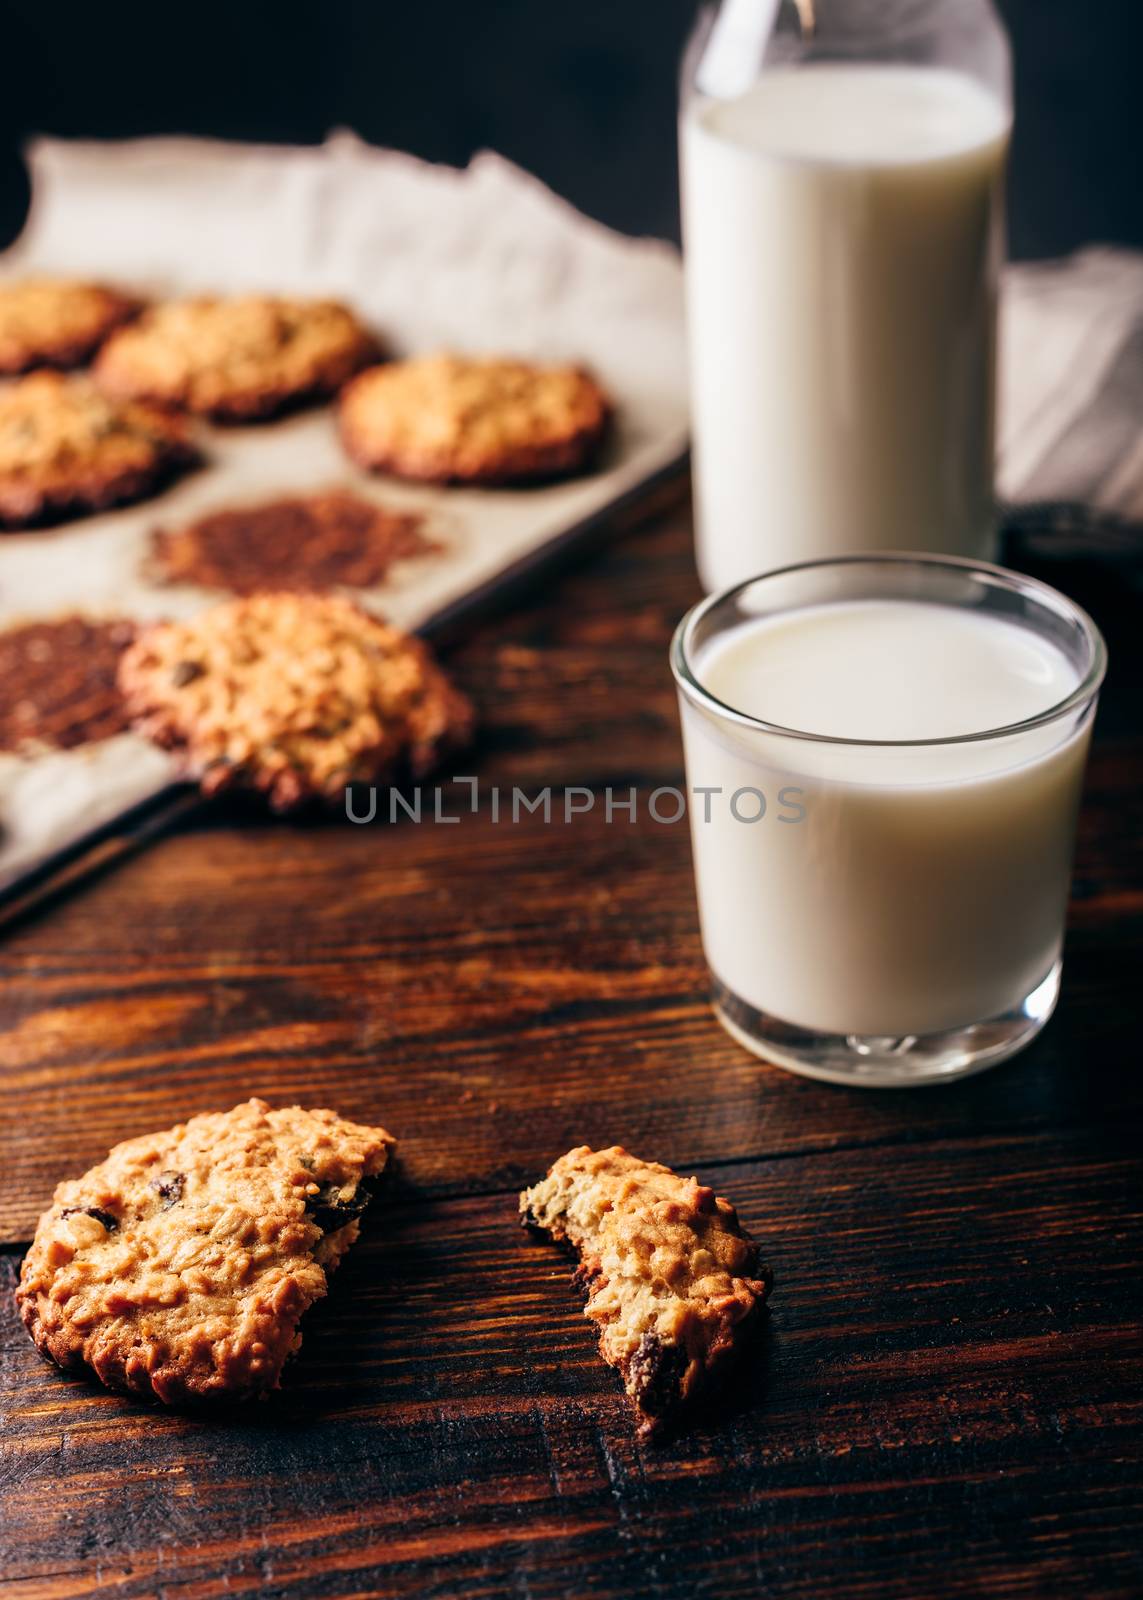 Oatmeal Cookies with Raisins and Glass of Milk for Breakfast. Some Cookies on Parchment Paper with Bottle on Backdrop. Vertical Orientation.